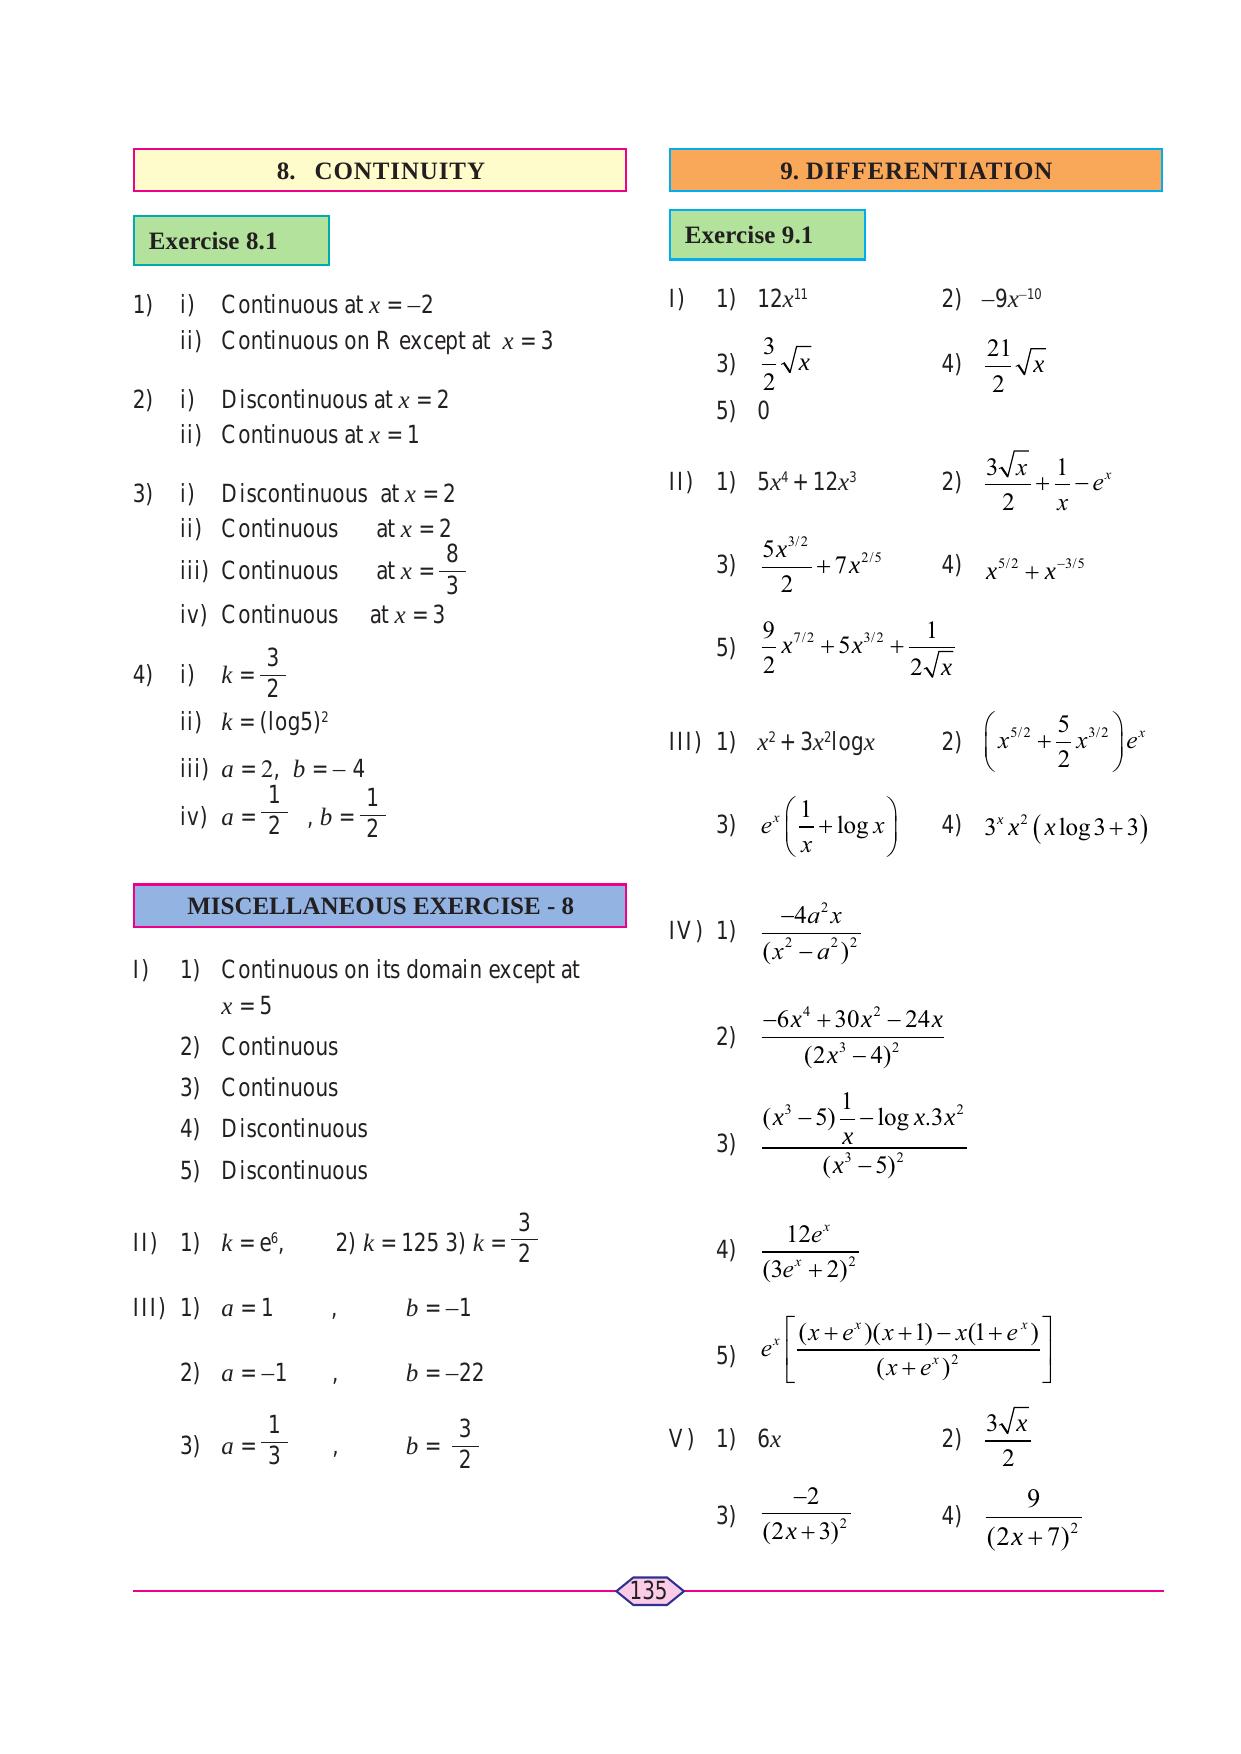 Maharashtra Board Class 11 Maths (Commerce) (Part 1) Textbook - Page 145